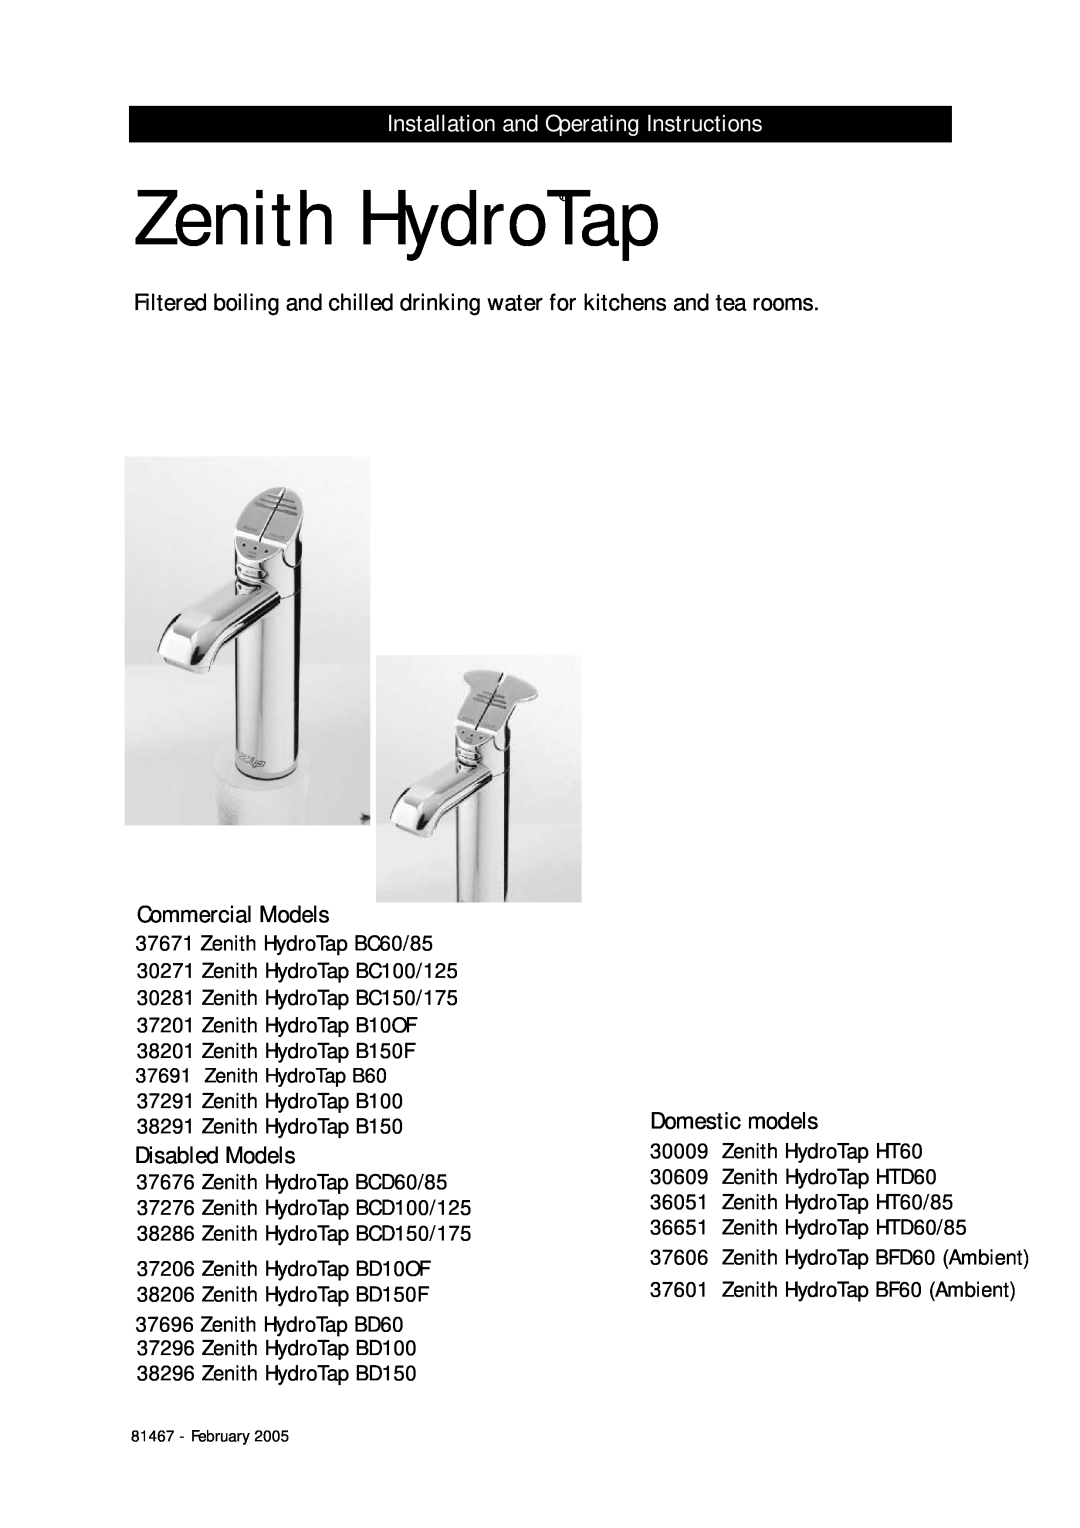 Zenith 37691, 38291 manual Installation and Operating Instructions, Zenith HydroTap, Commercial Models, Domestic models 